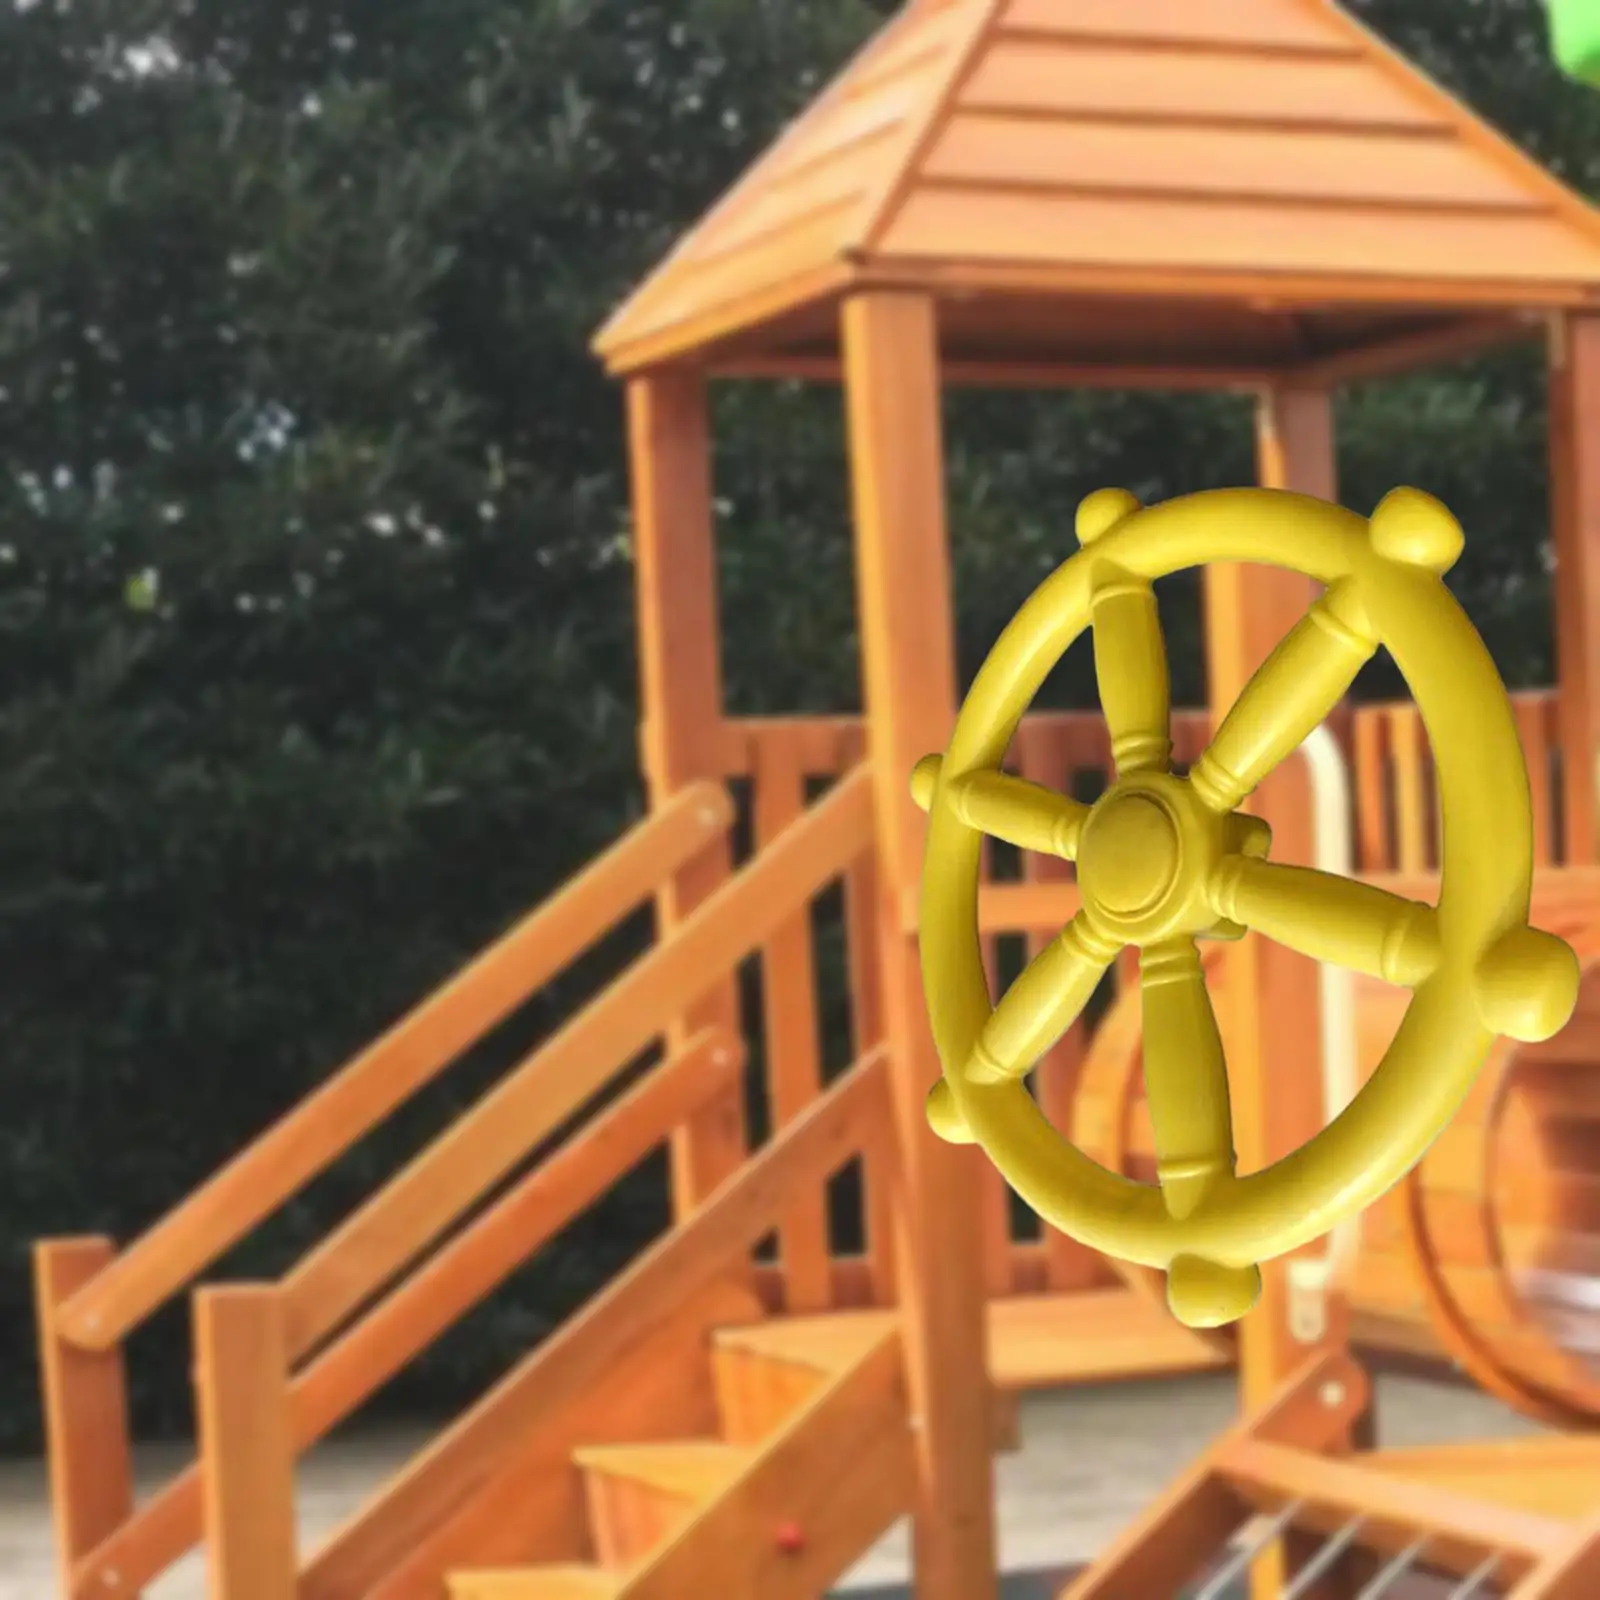 Pirate Ship Wheel with Screws Climb Playground Equipment Jungle Gym Steering Wheel for Park Outdoor Tree House Garden Play House